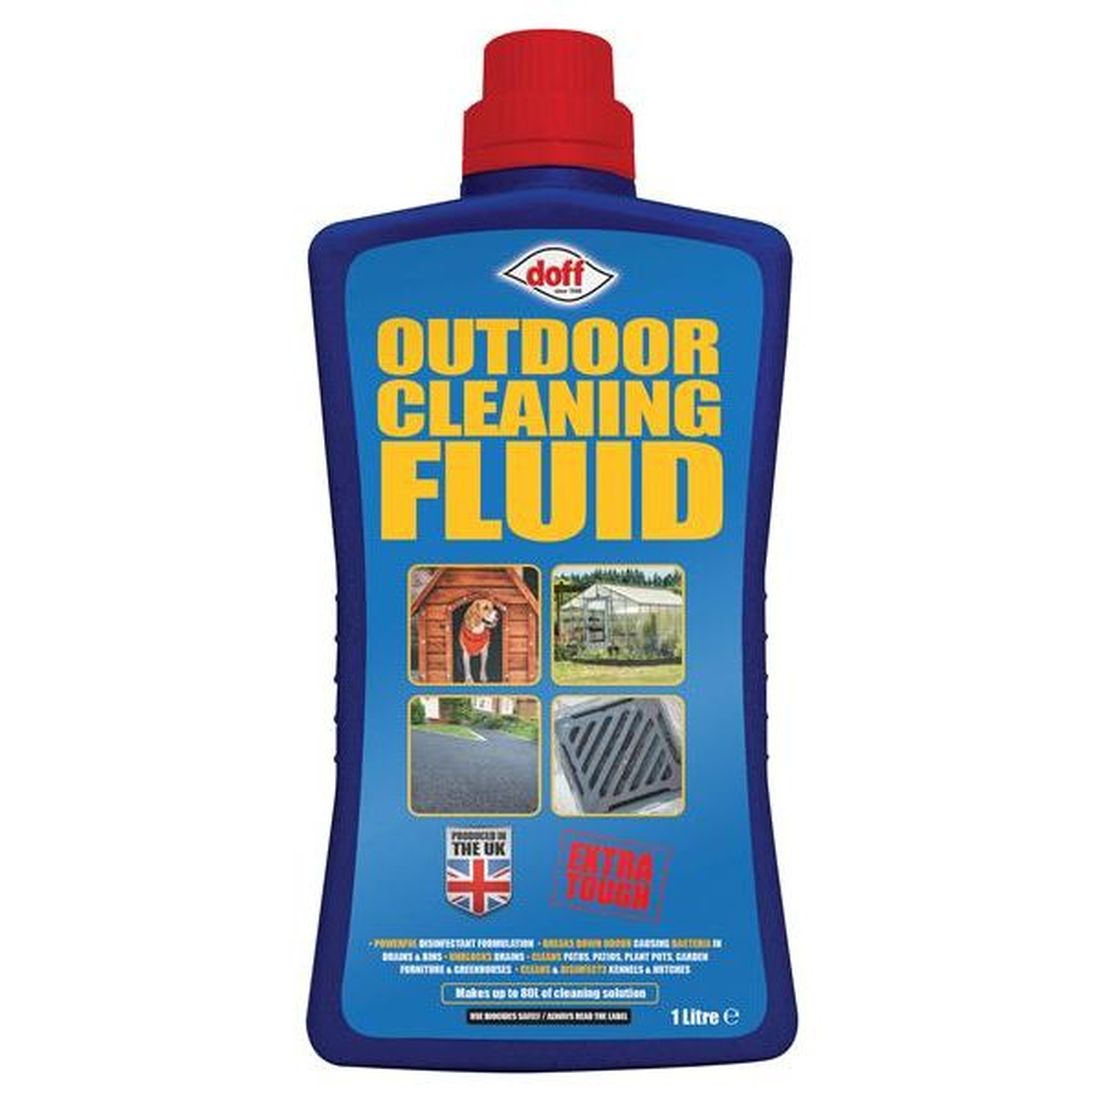 DOFF Outdoor Cleaning Fluid Concentrate 1 litre                                      